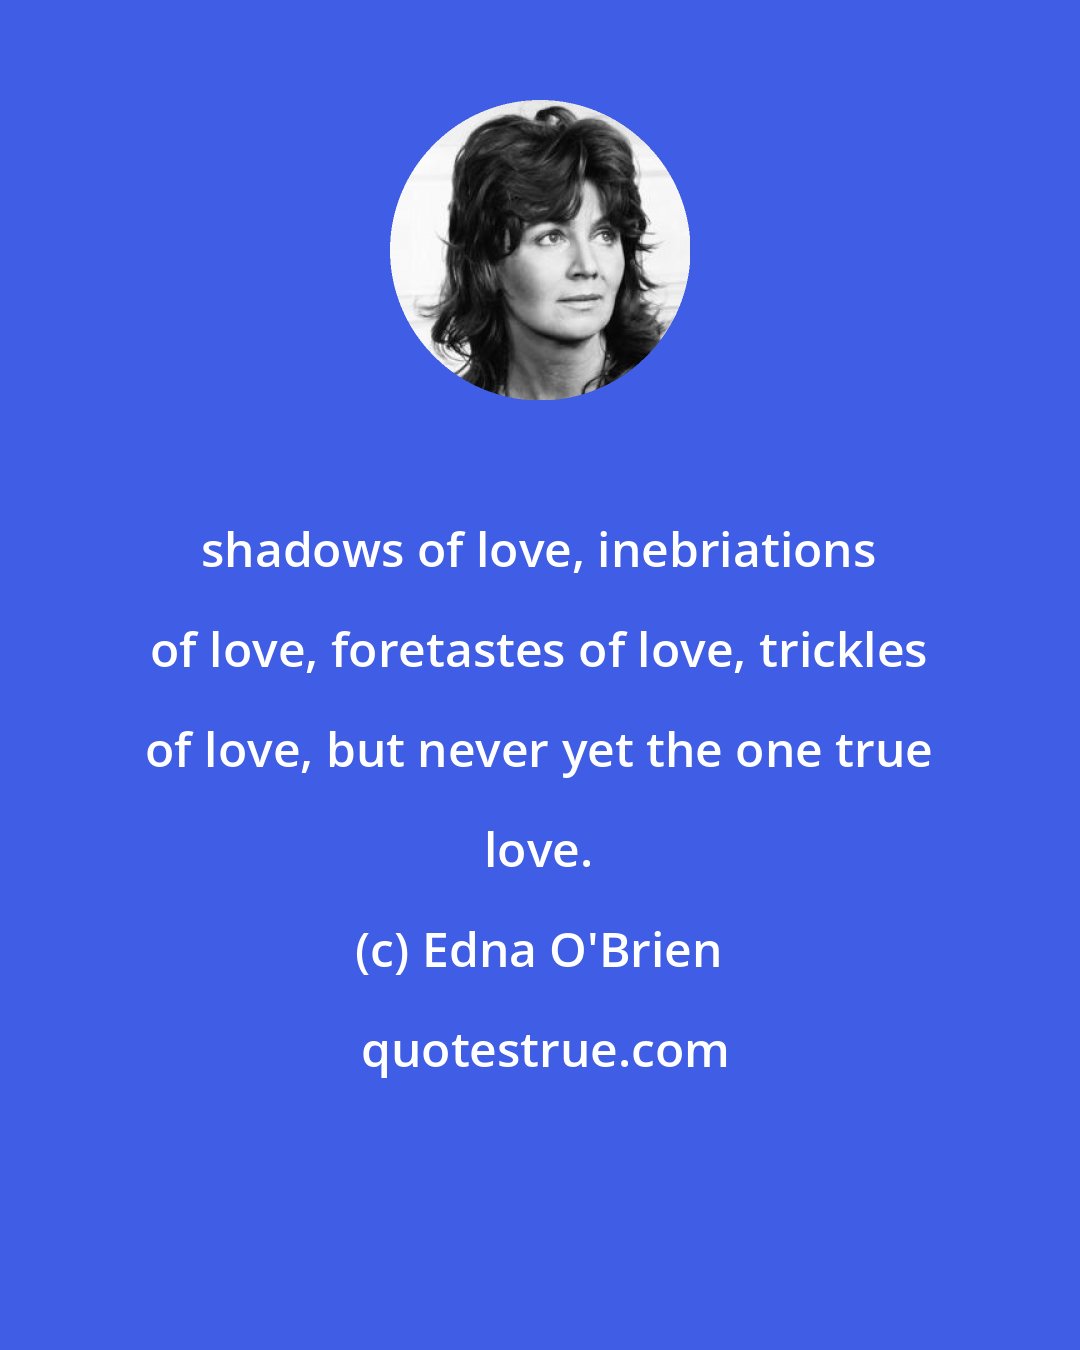 Edna O'Brien: shadows of love, inebriations of love, foretastes of love, trickles of love, but never yet the one true love.